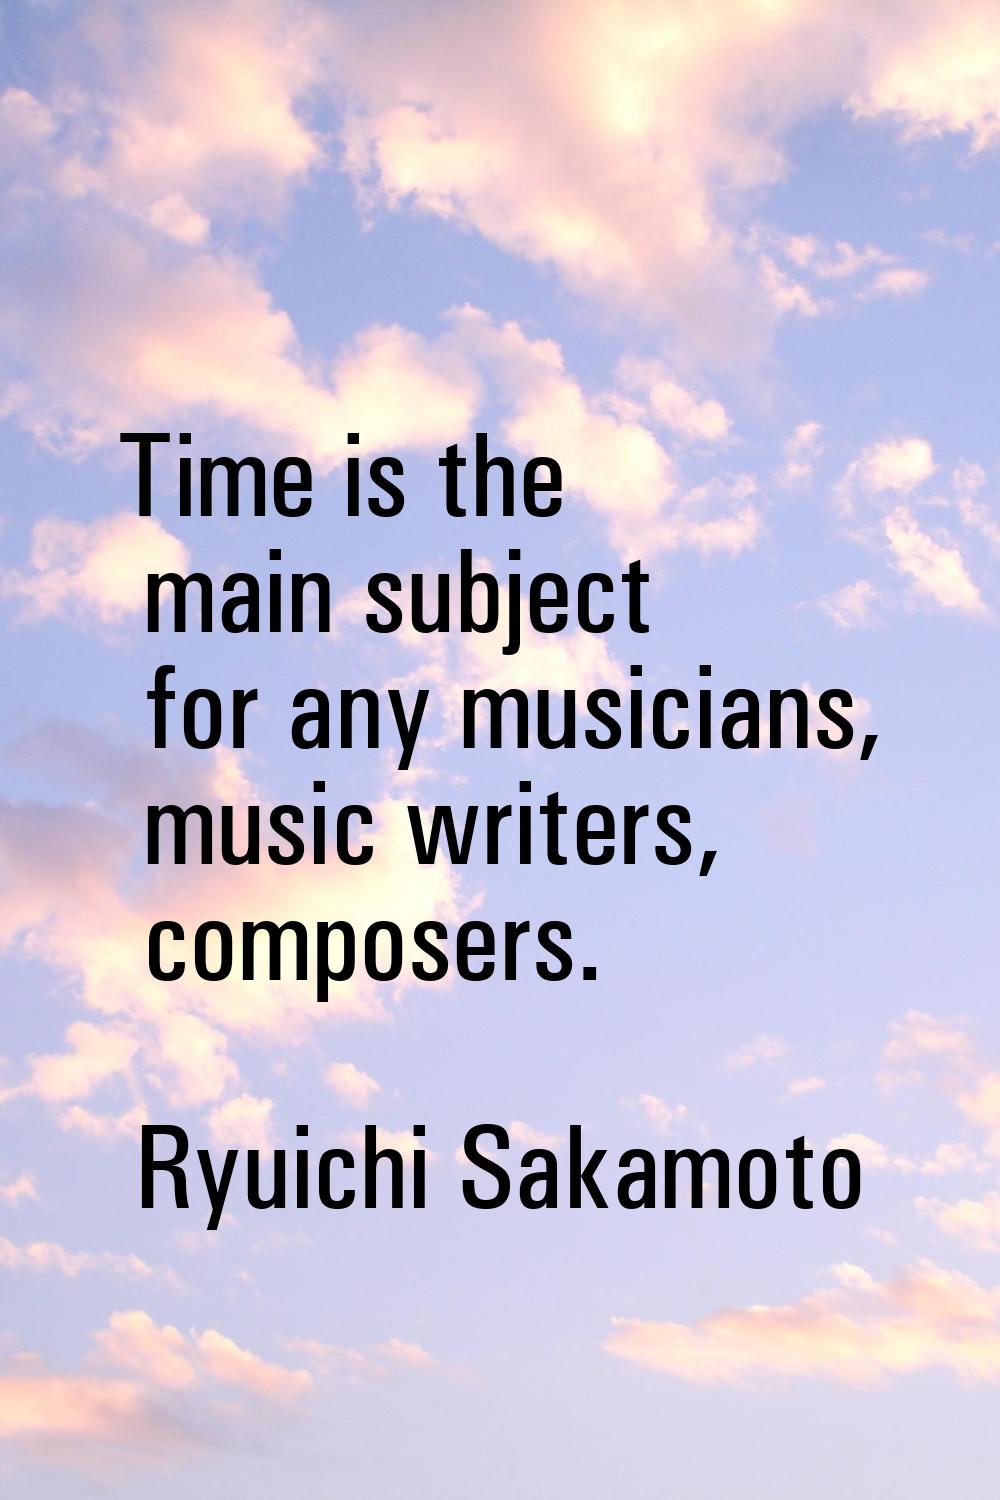 Time is the main subject for any musicians, music writers, composers.